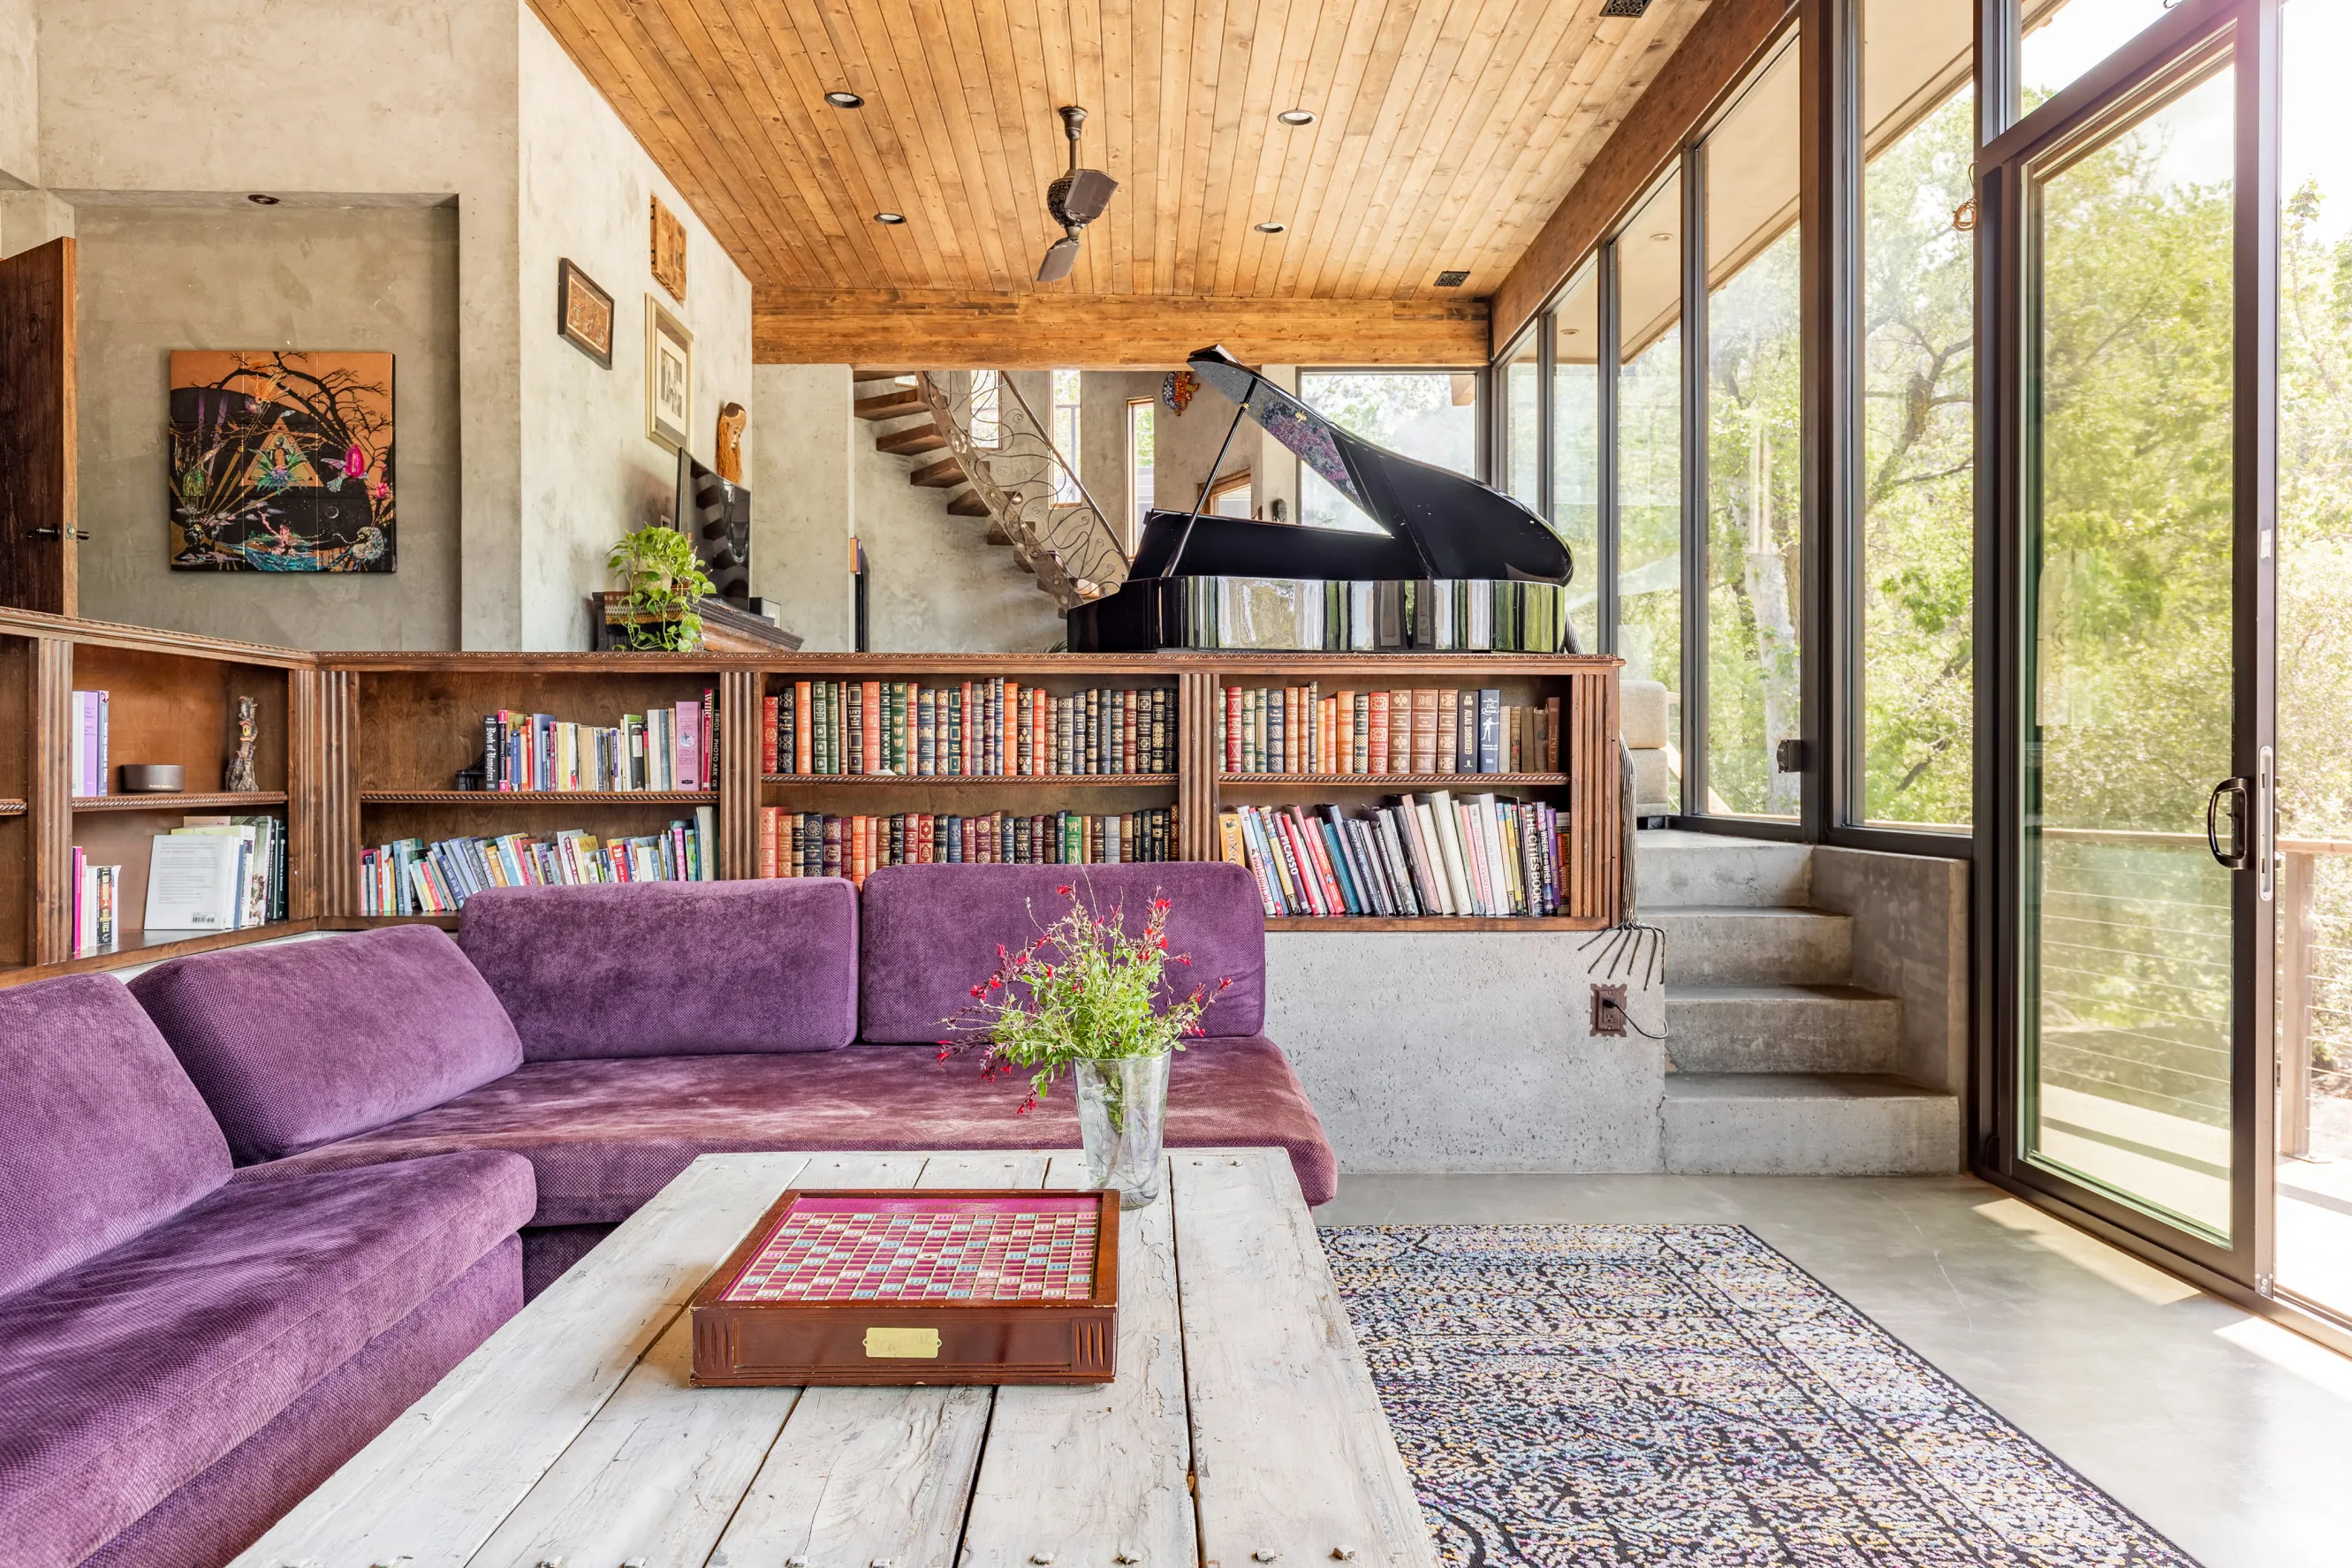 living room with couches, piano, books on shelves and floor to ceiling windows